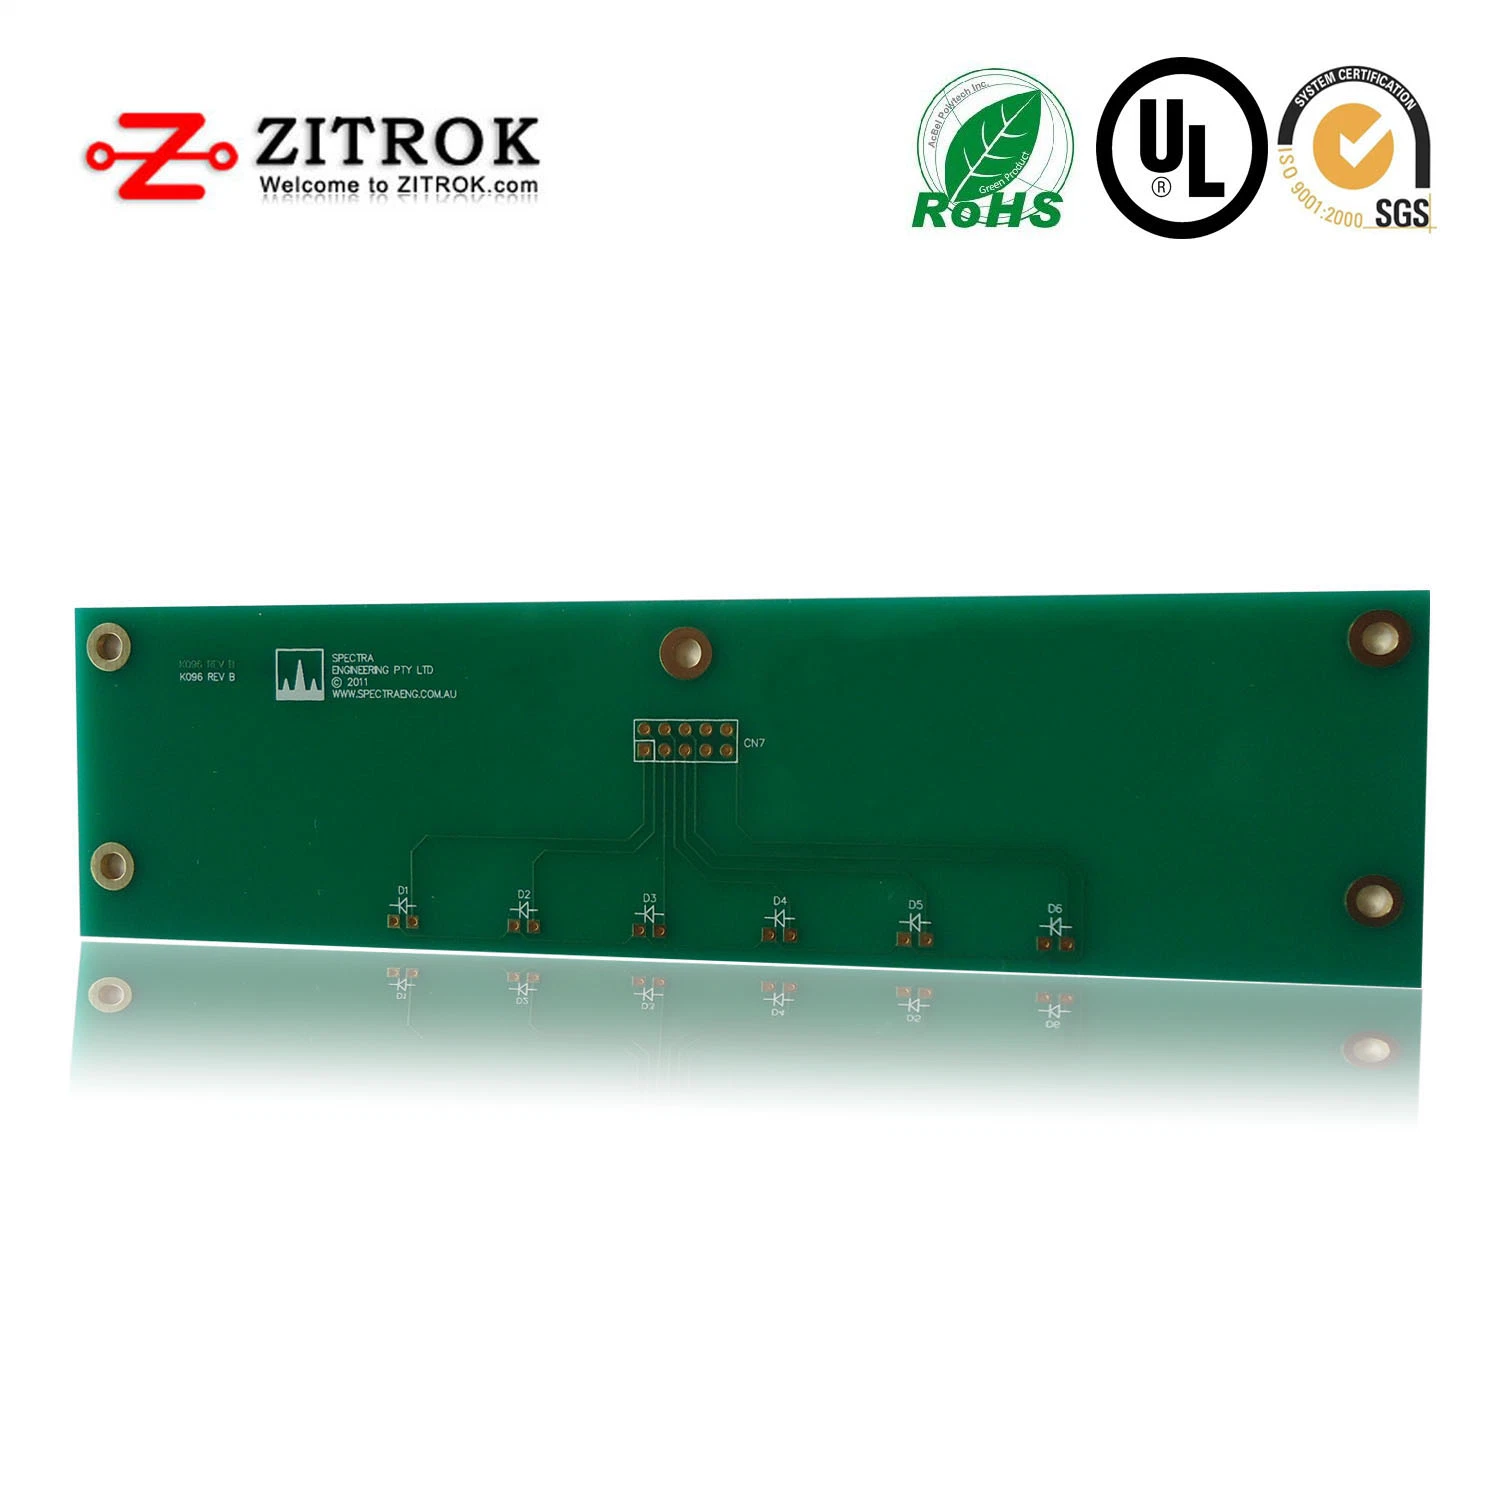 OEM Electronics Factory Multilayer Printed Circuit Board PCBA&PCB Manufacturing